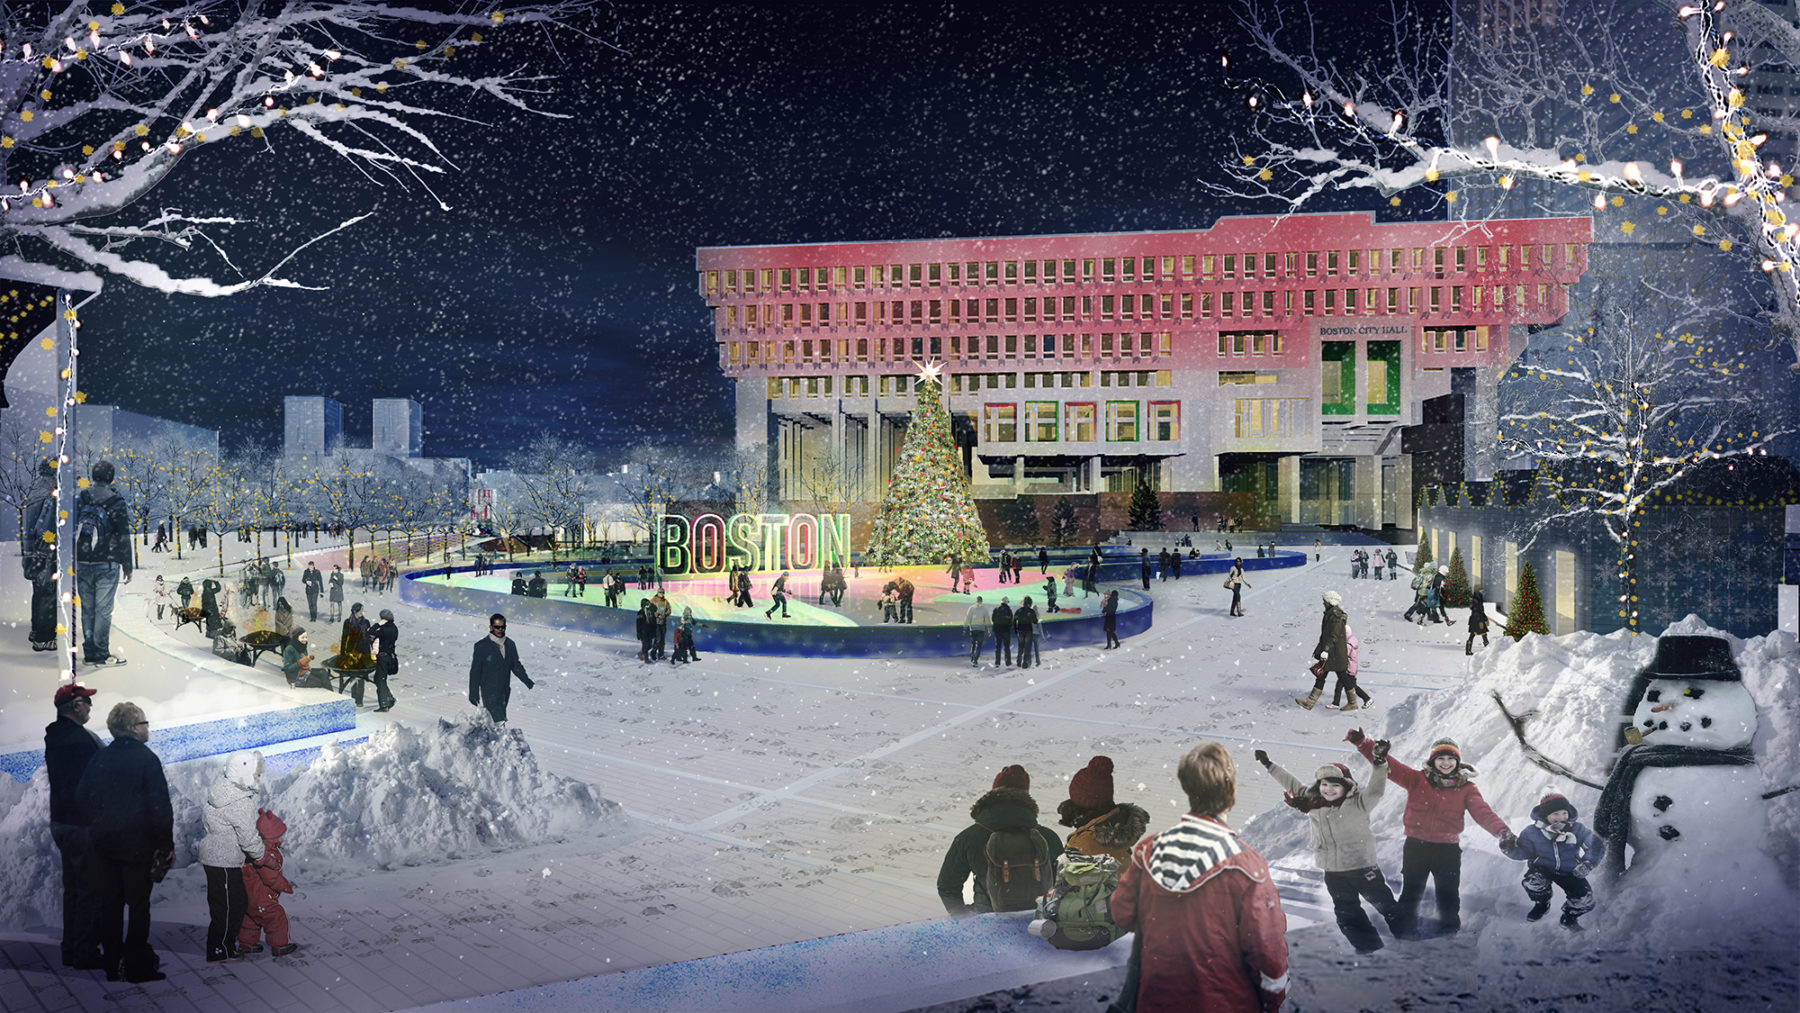 rendering of people ice skating in the plaza in winter